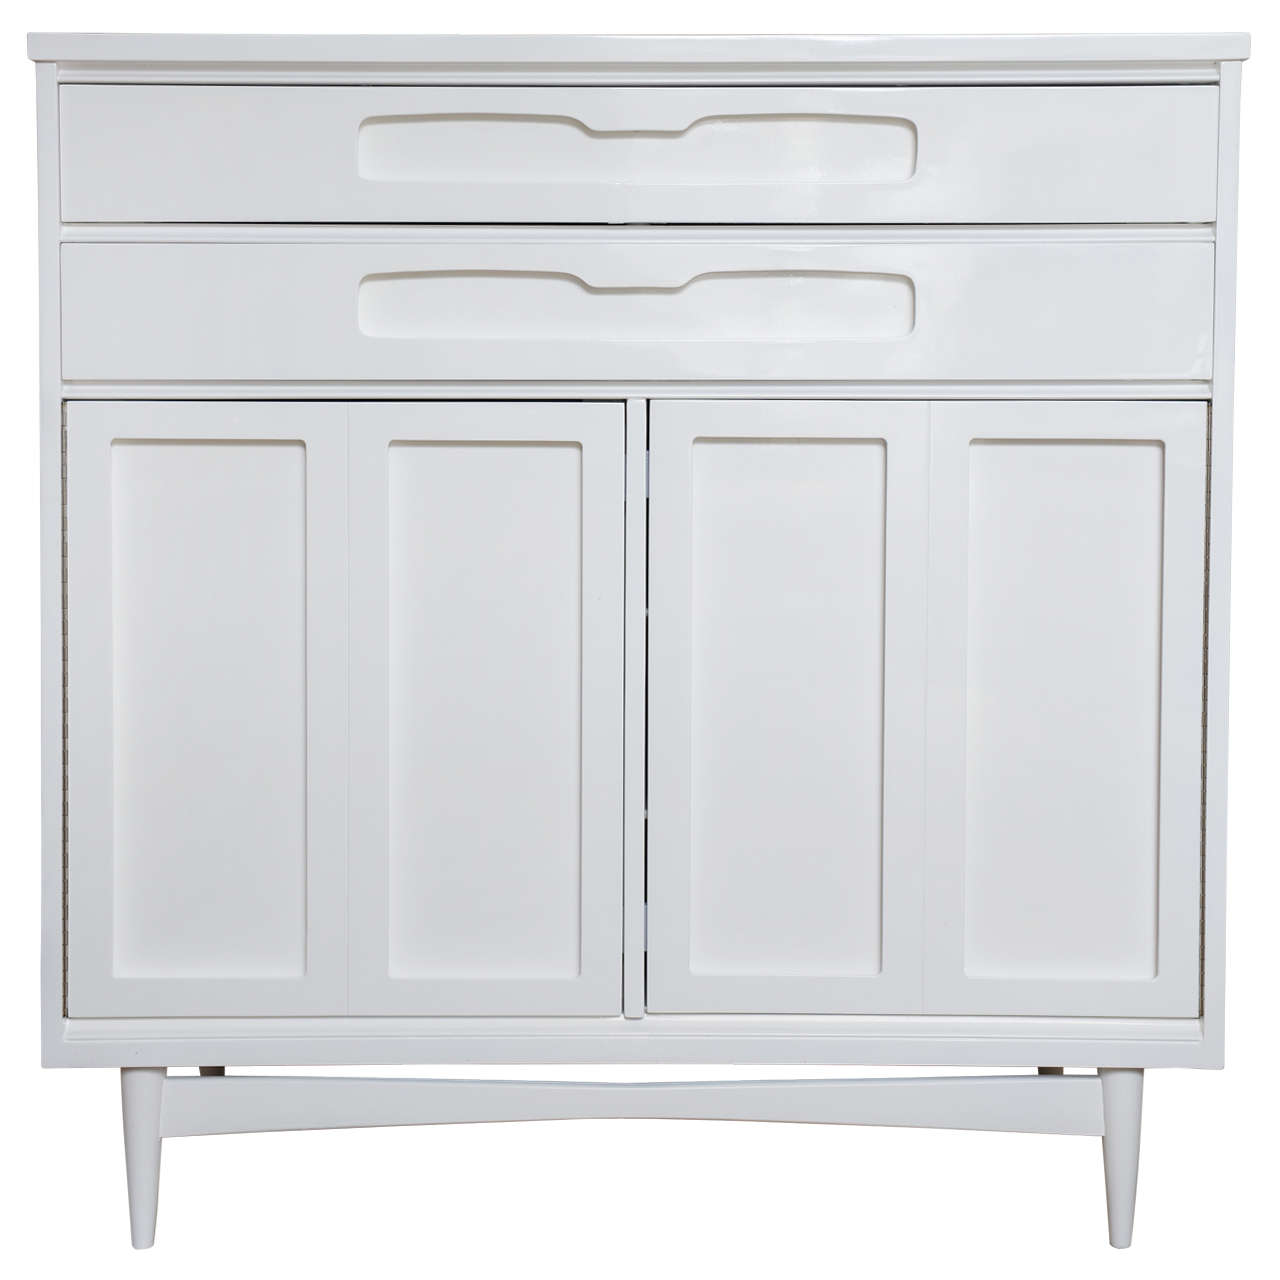 Floating wardrobe or highboy finished in high gloss durable white lacquer featuring two large top drawers followed by double doors revealing interior drawers and shelves. Excellent storage capabilities in this beautiful mid century floating chest.